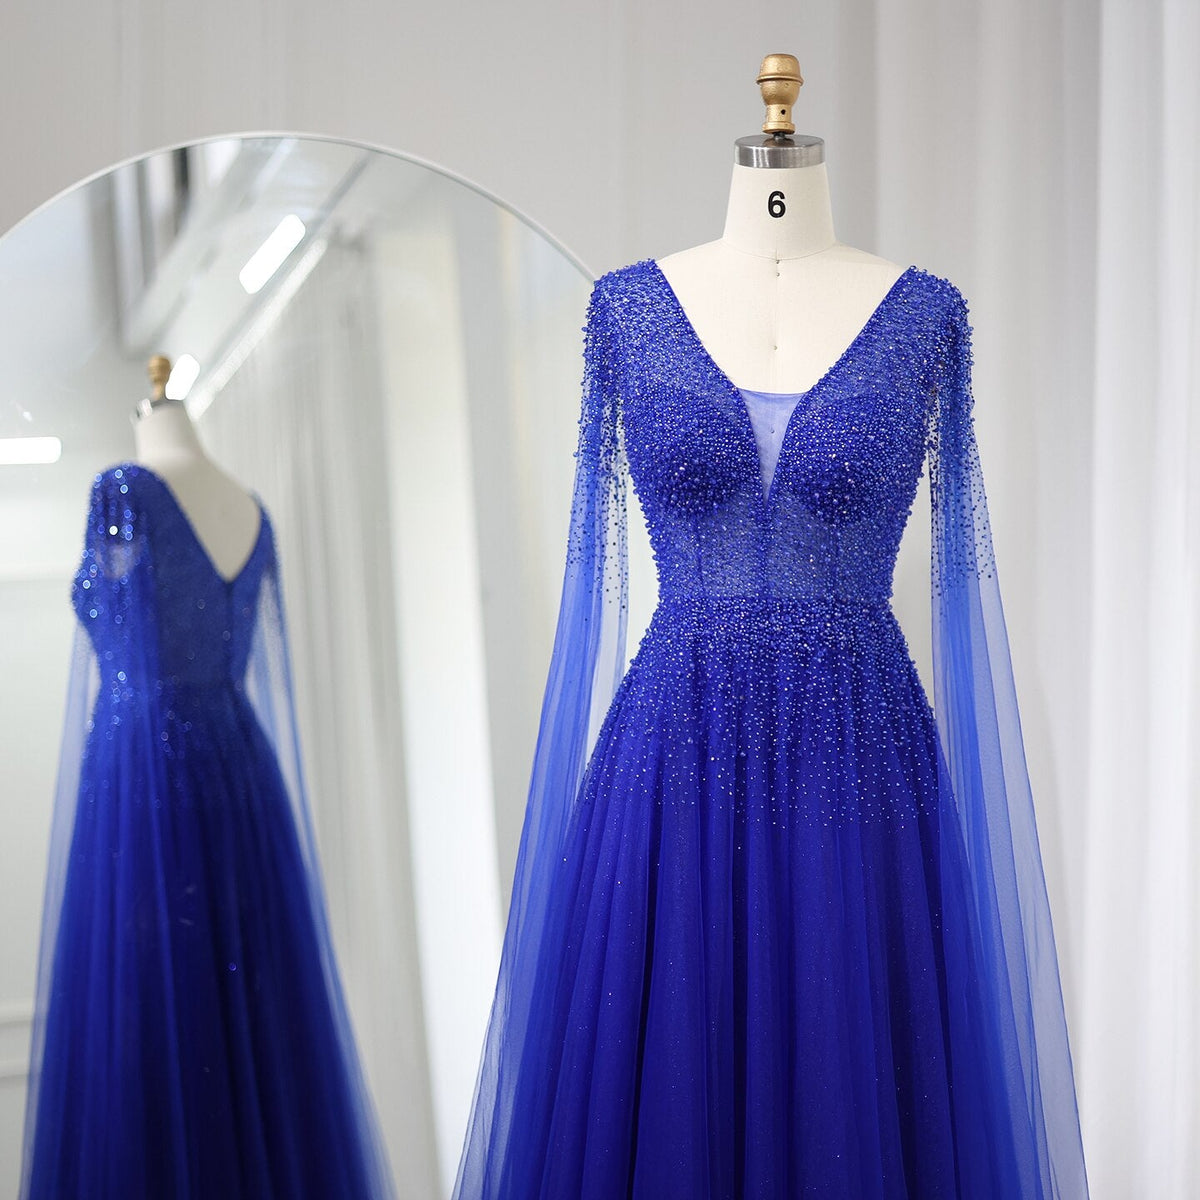 Dreamy Vow Royal Blue Luxury Dubai Evening Dress with Cape Sleeves Elegant Pink V-Neck Purple Women Wedding Party Gowns 012